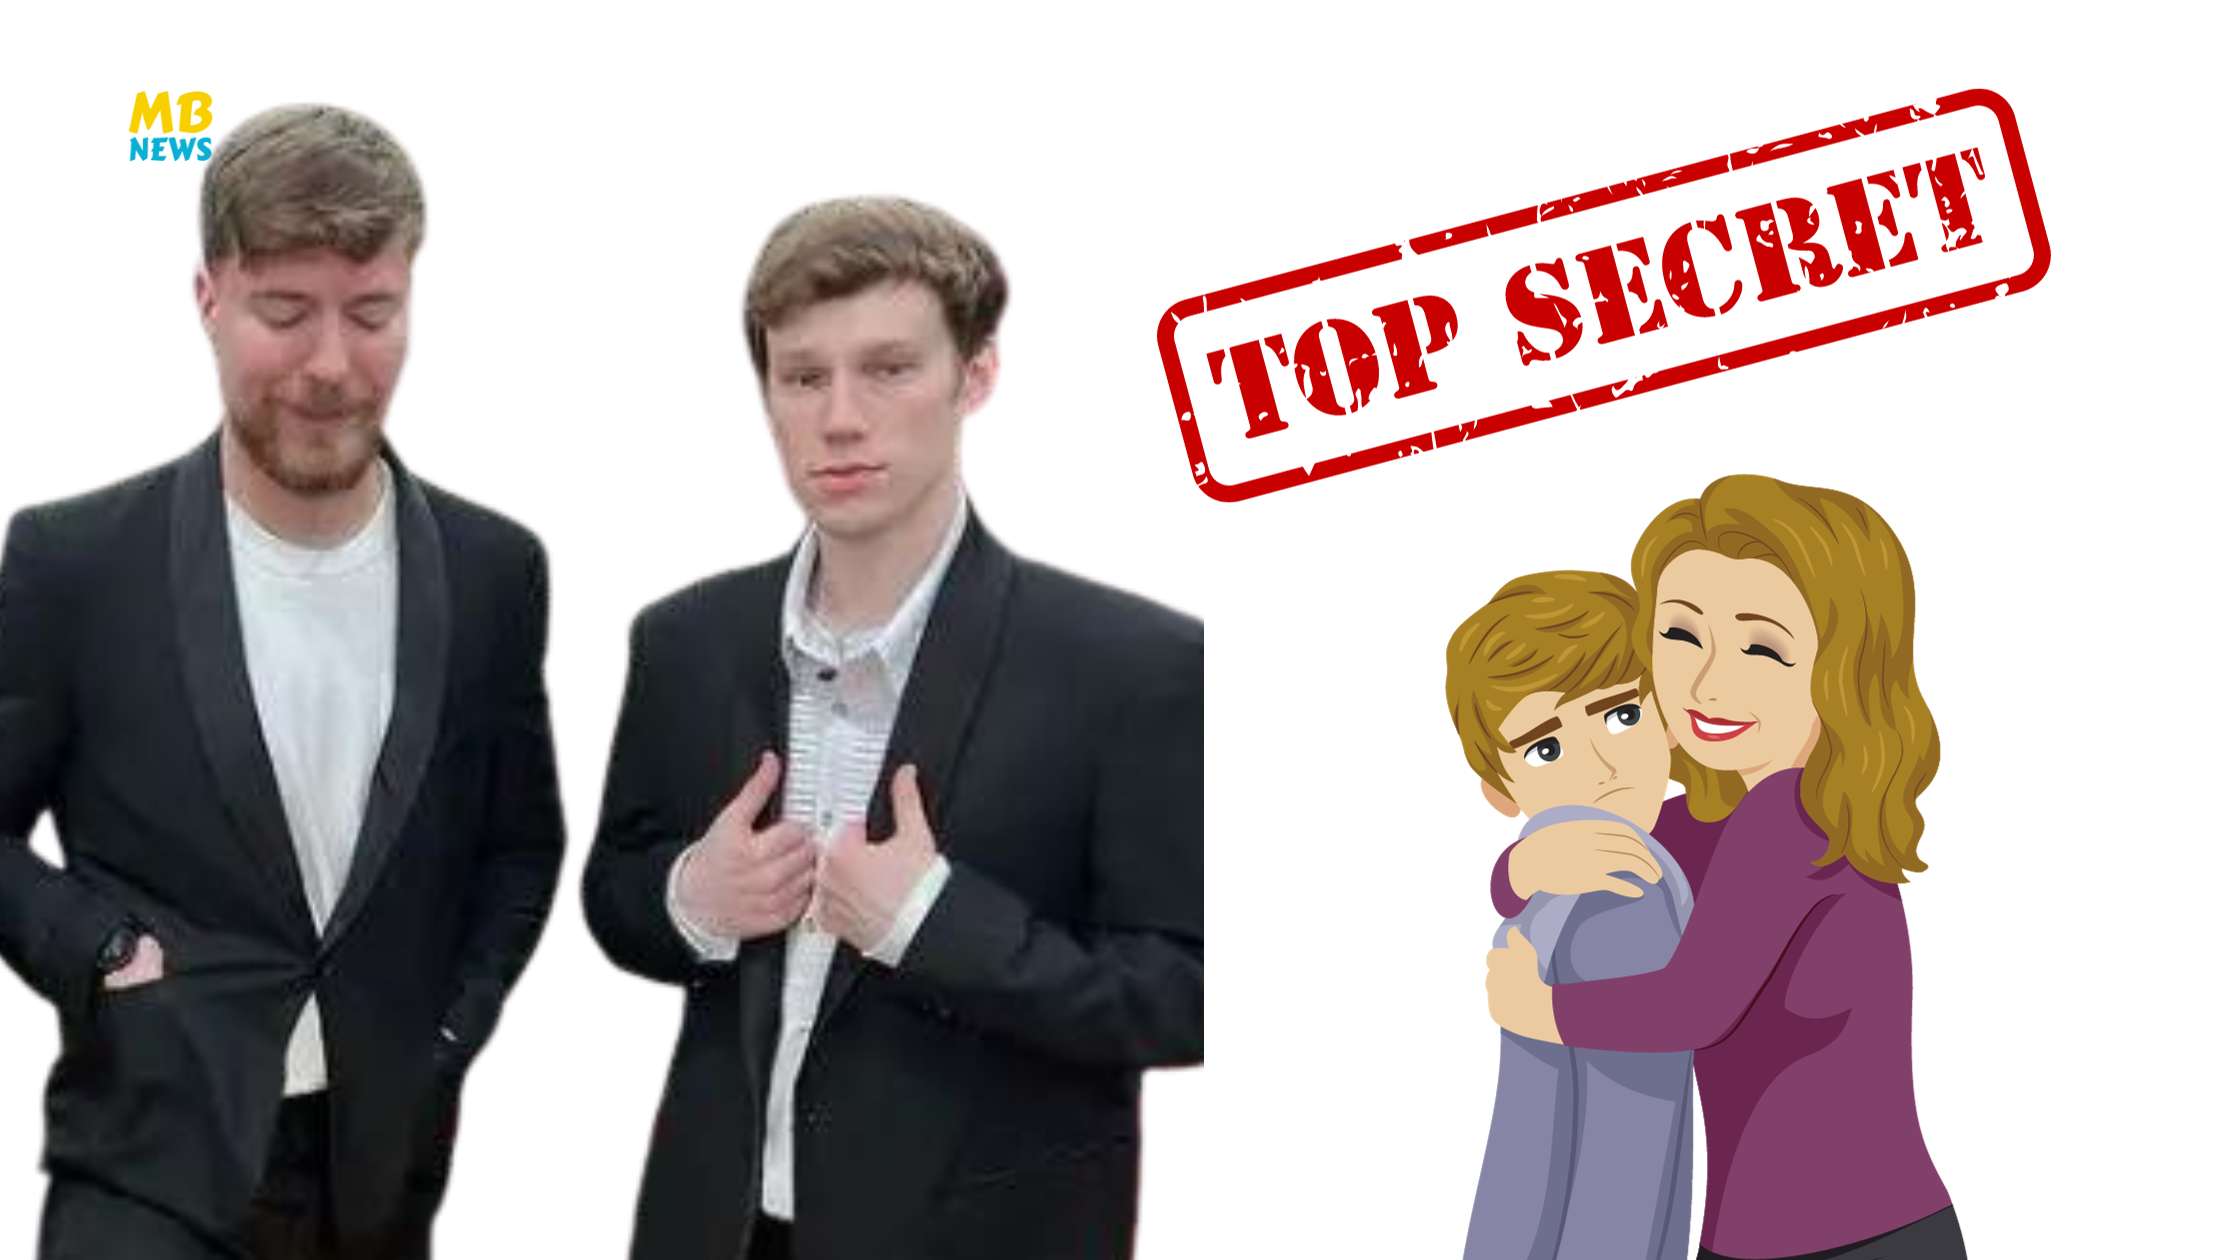 MrBeast Unveils Nolan's Family Secrets and Shares Nolan's Mom's Photo in Latest '7 Days Buried Alive' Video!